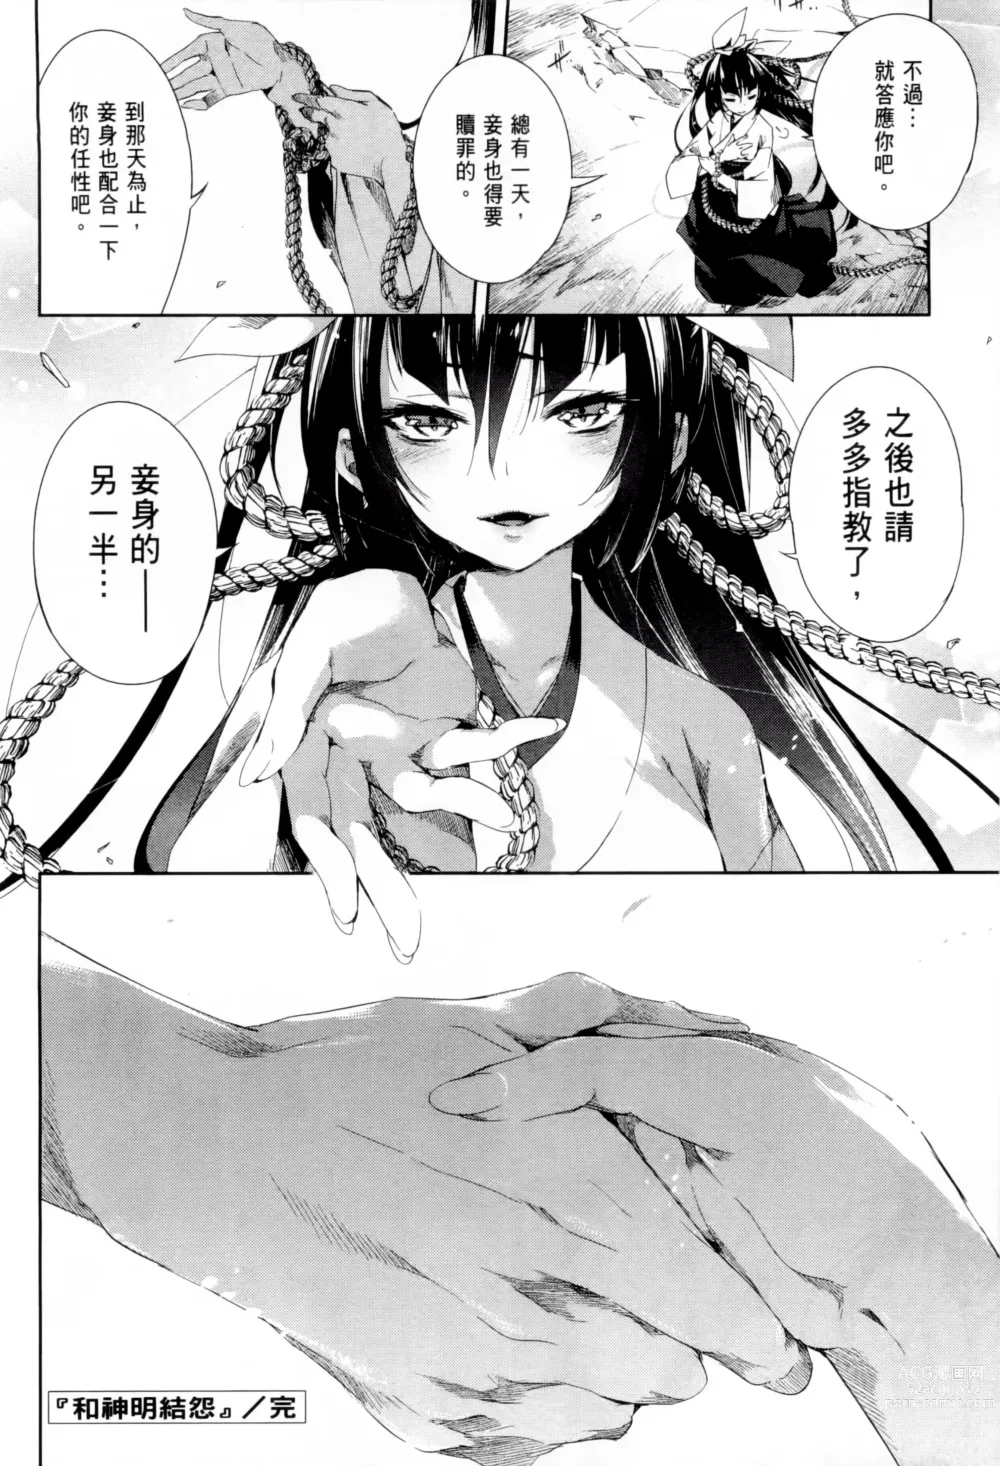 Page 187 of manga 神さまの怨結び 第1巻